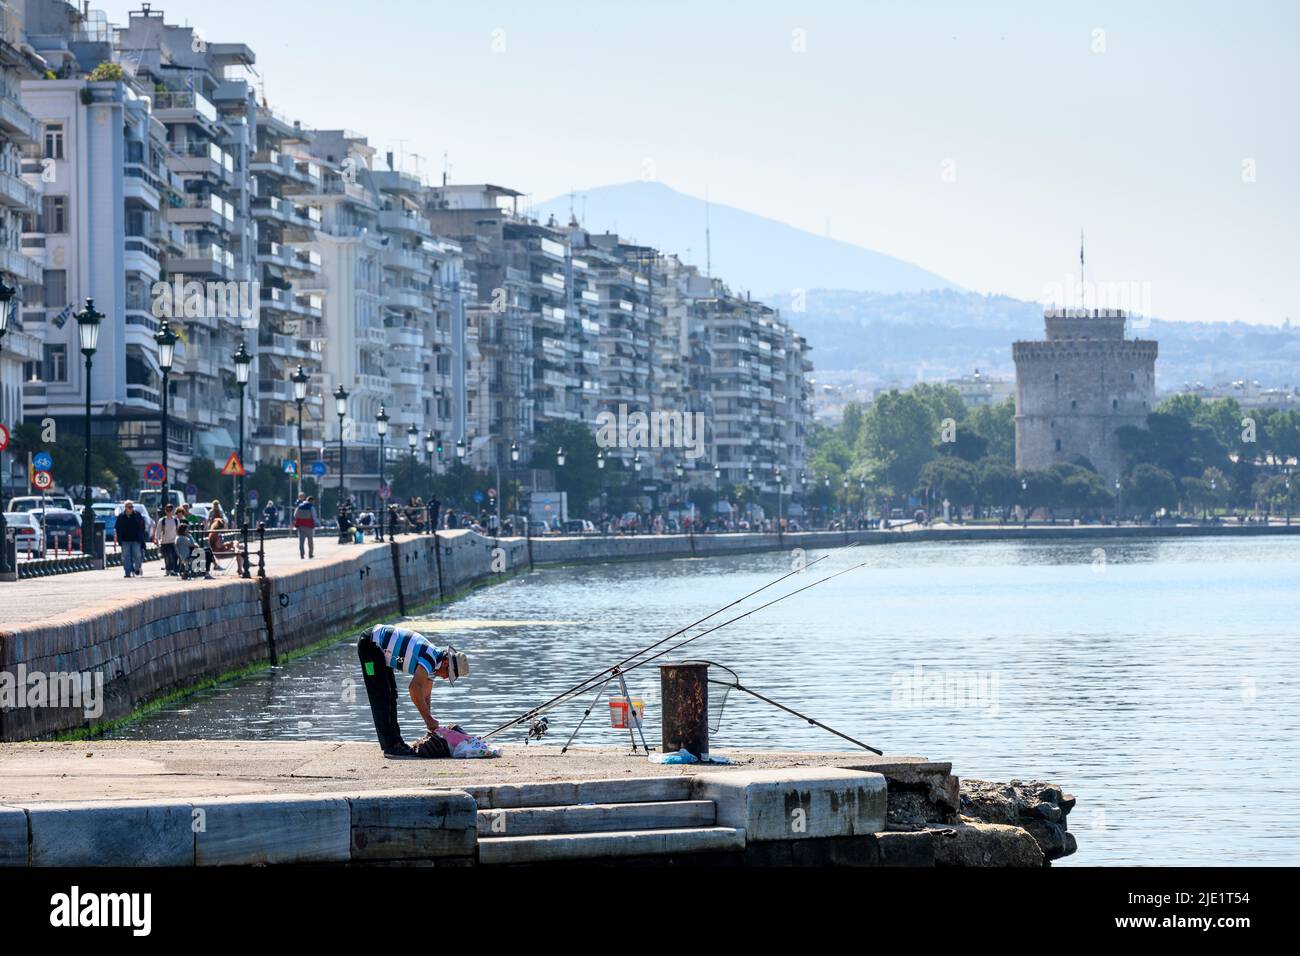 A fisherman on Thessaloniki waterfront with Nikis Avenue and the white Tower in the background, Macedonia, Northern Greece Stock Photo